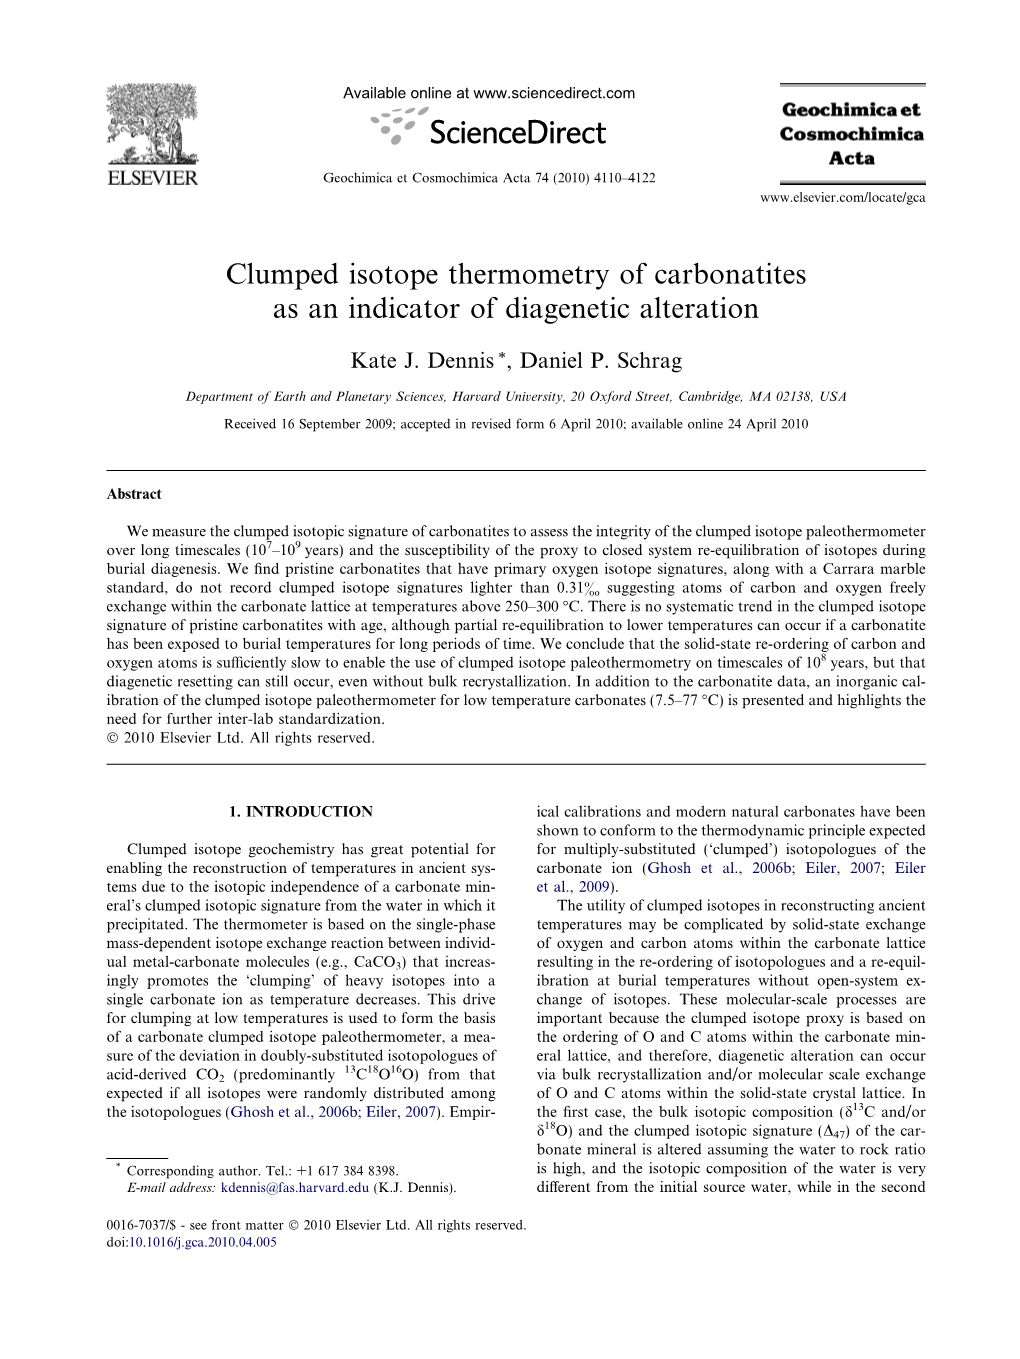 Clumped Isotope Thermometry of Carbonatites As an Indicator of Diagenetic Alteration